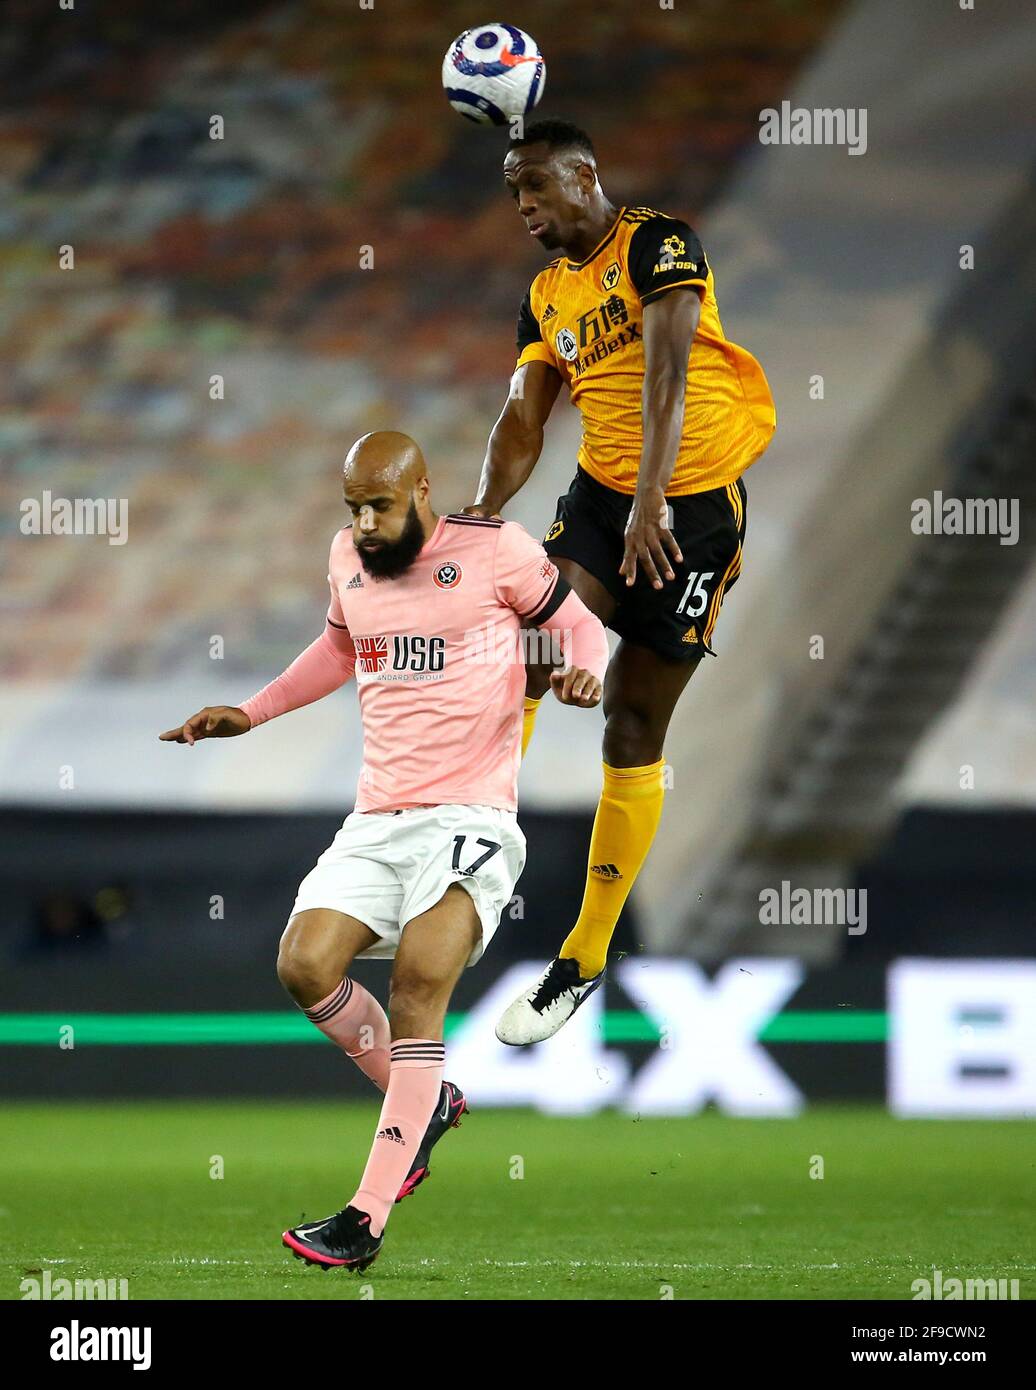 Sheffield United's David McGoldrick (left) and Wolverhampton Wanderers' Willy Boly battle for the ball during the Premier League match at Molineux, Wolverhampton. Picture date: Saturday April 17, 2021. Stock Photo